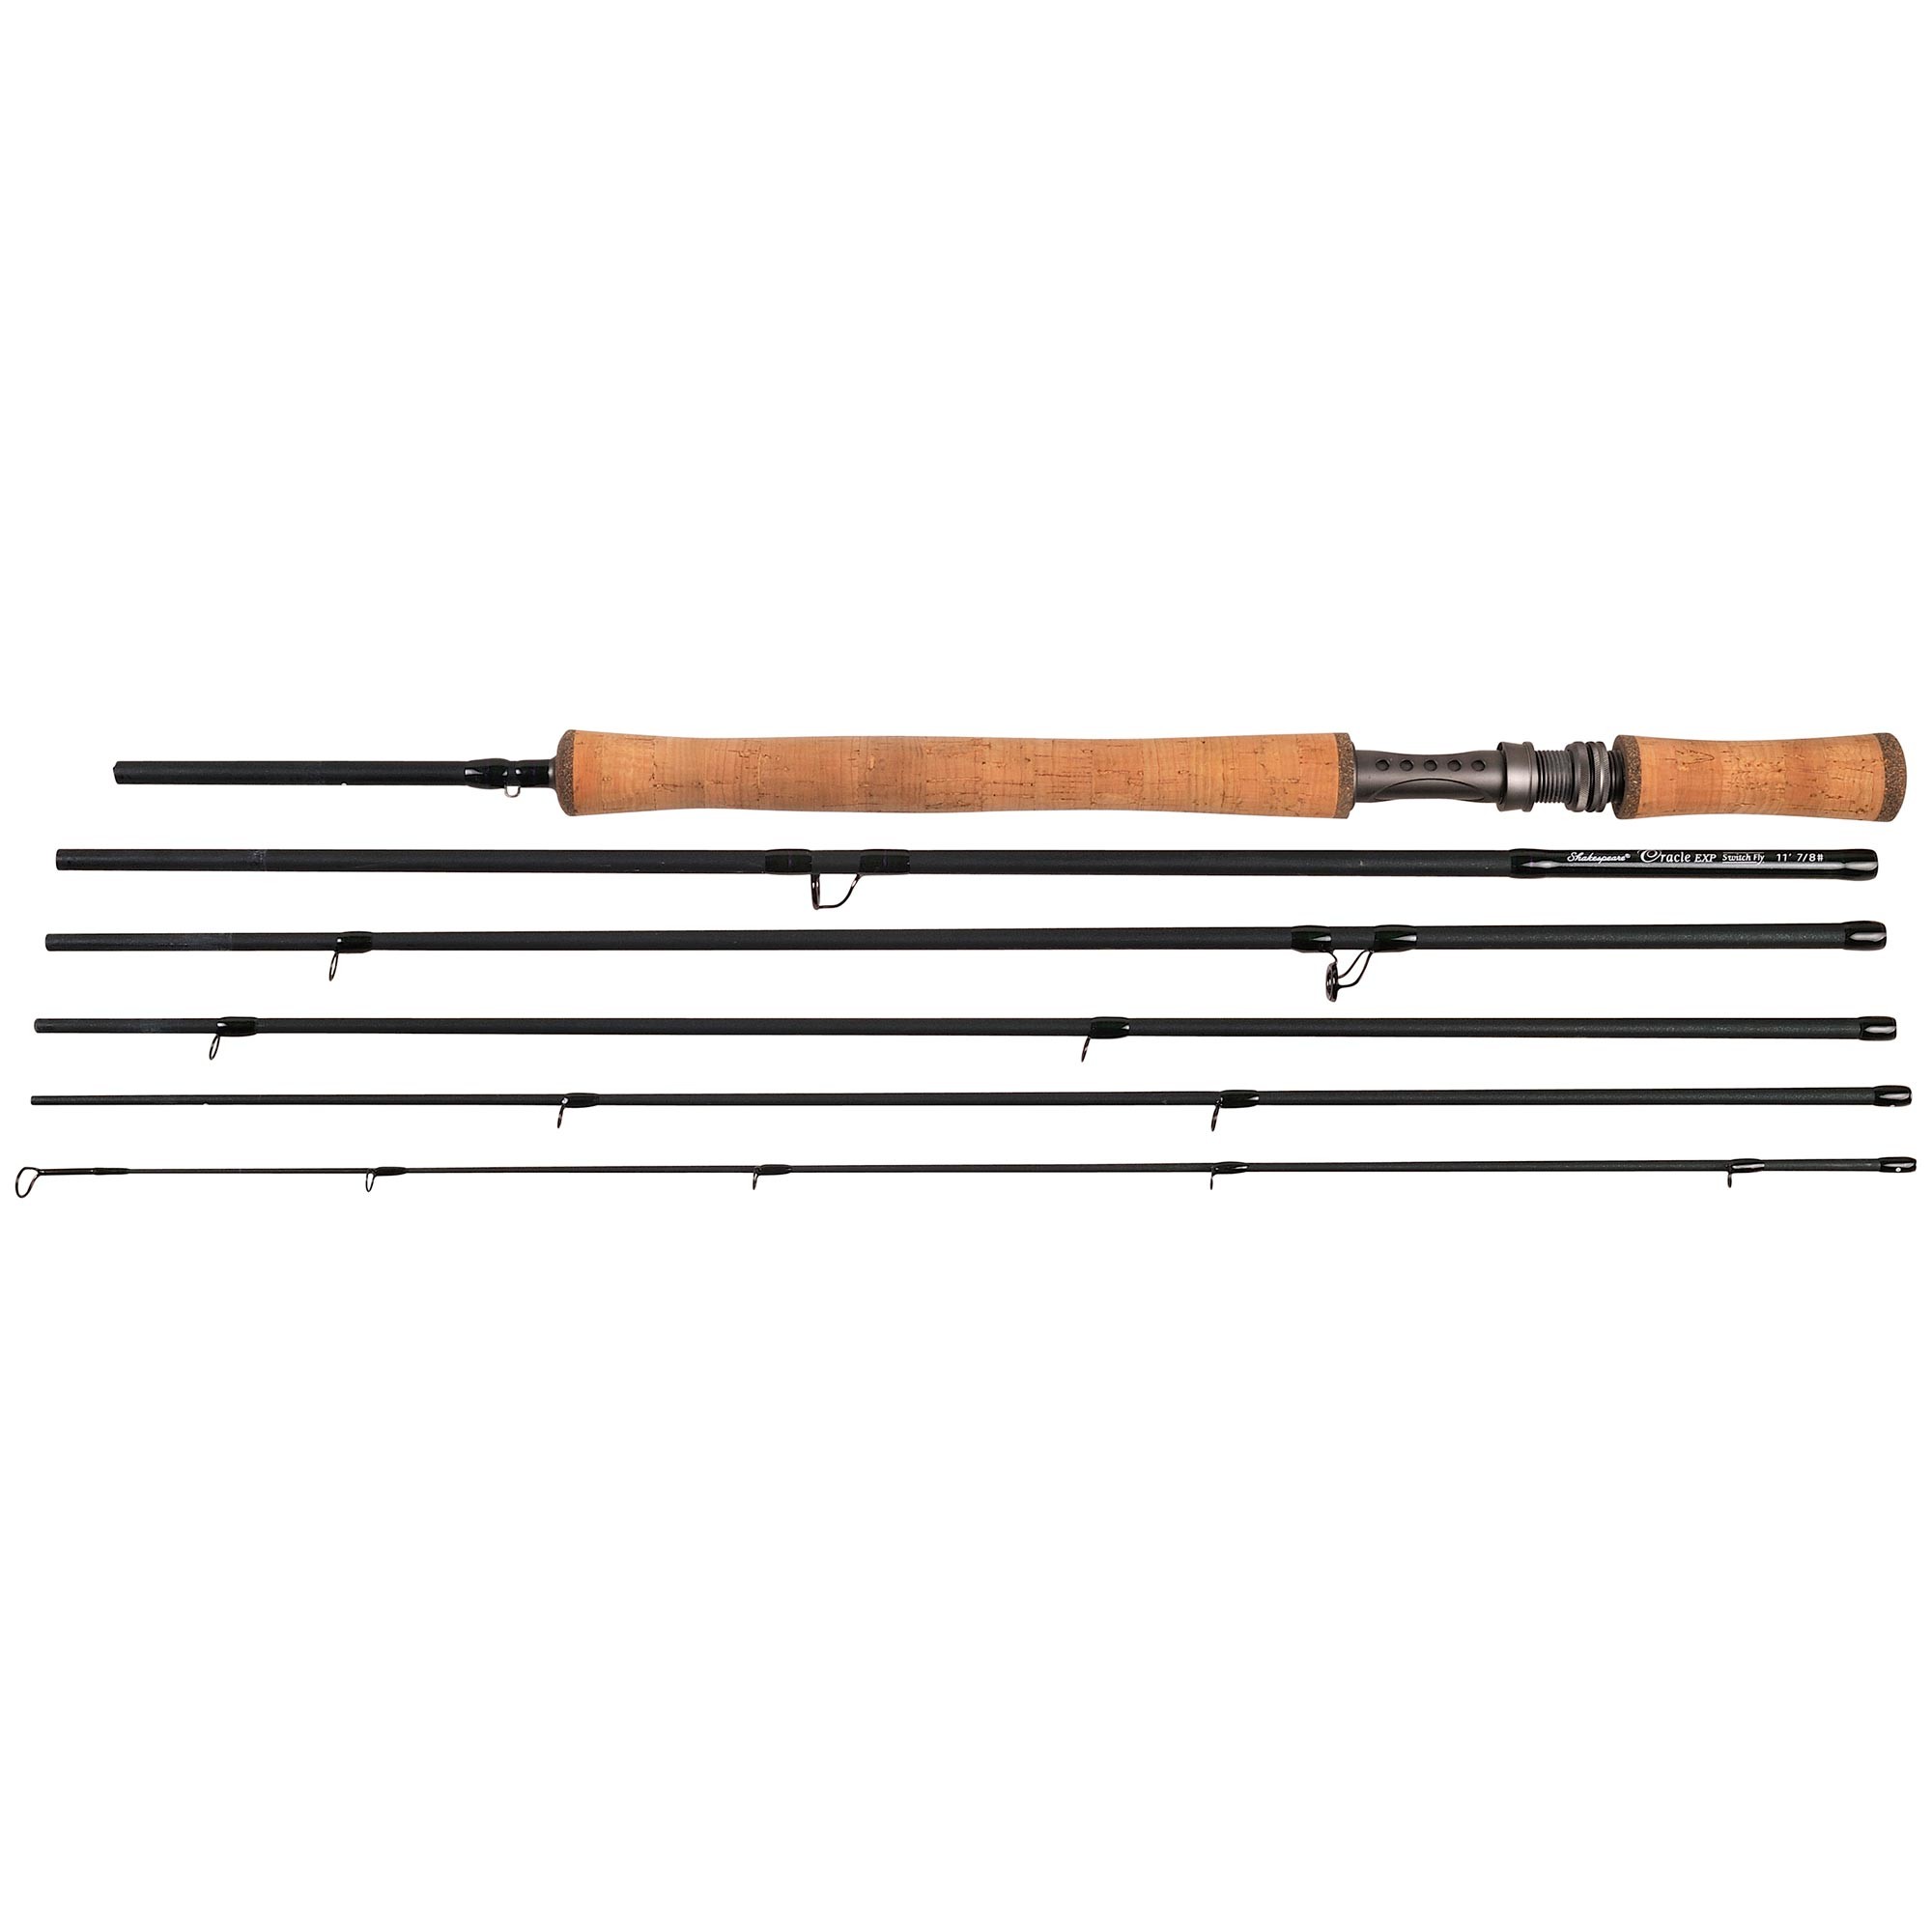 Which Switch? A guide to buying a Switch rod for yourself.